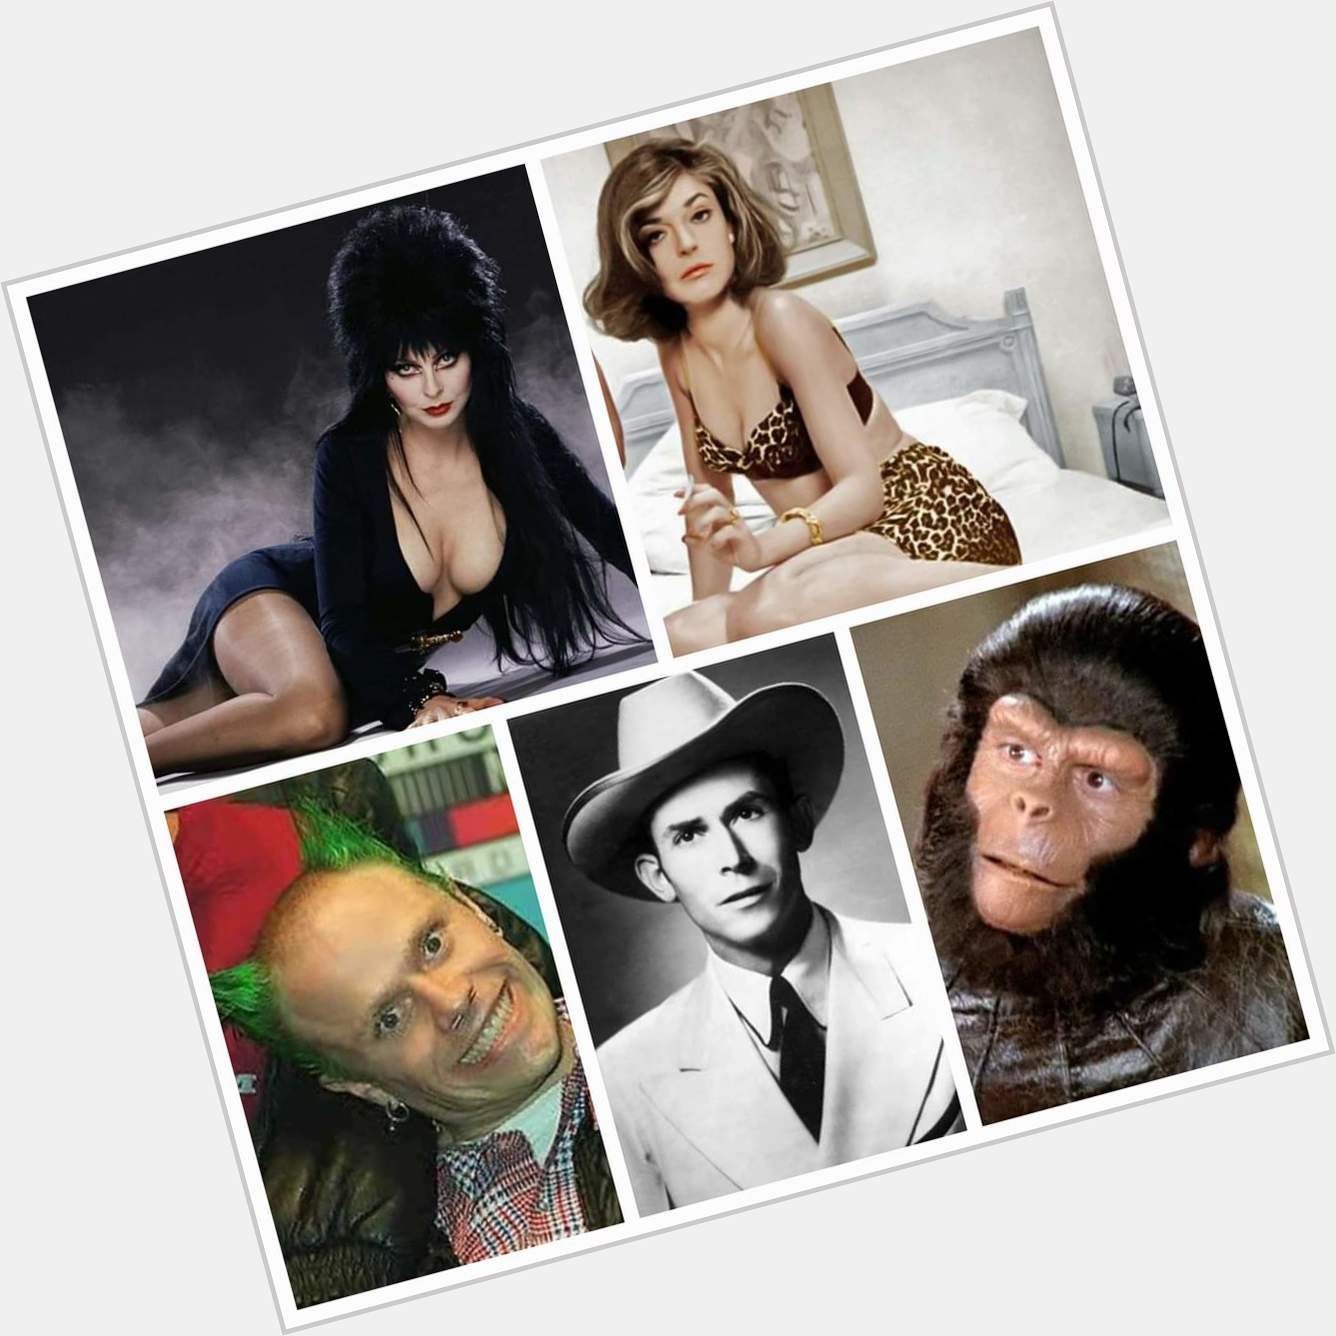 September 17th 
Happy Birthday to Cassandra Peterson, Anne Bancroft, Keith Flint, Hank Williams, and Roddy McDowall! 